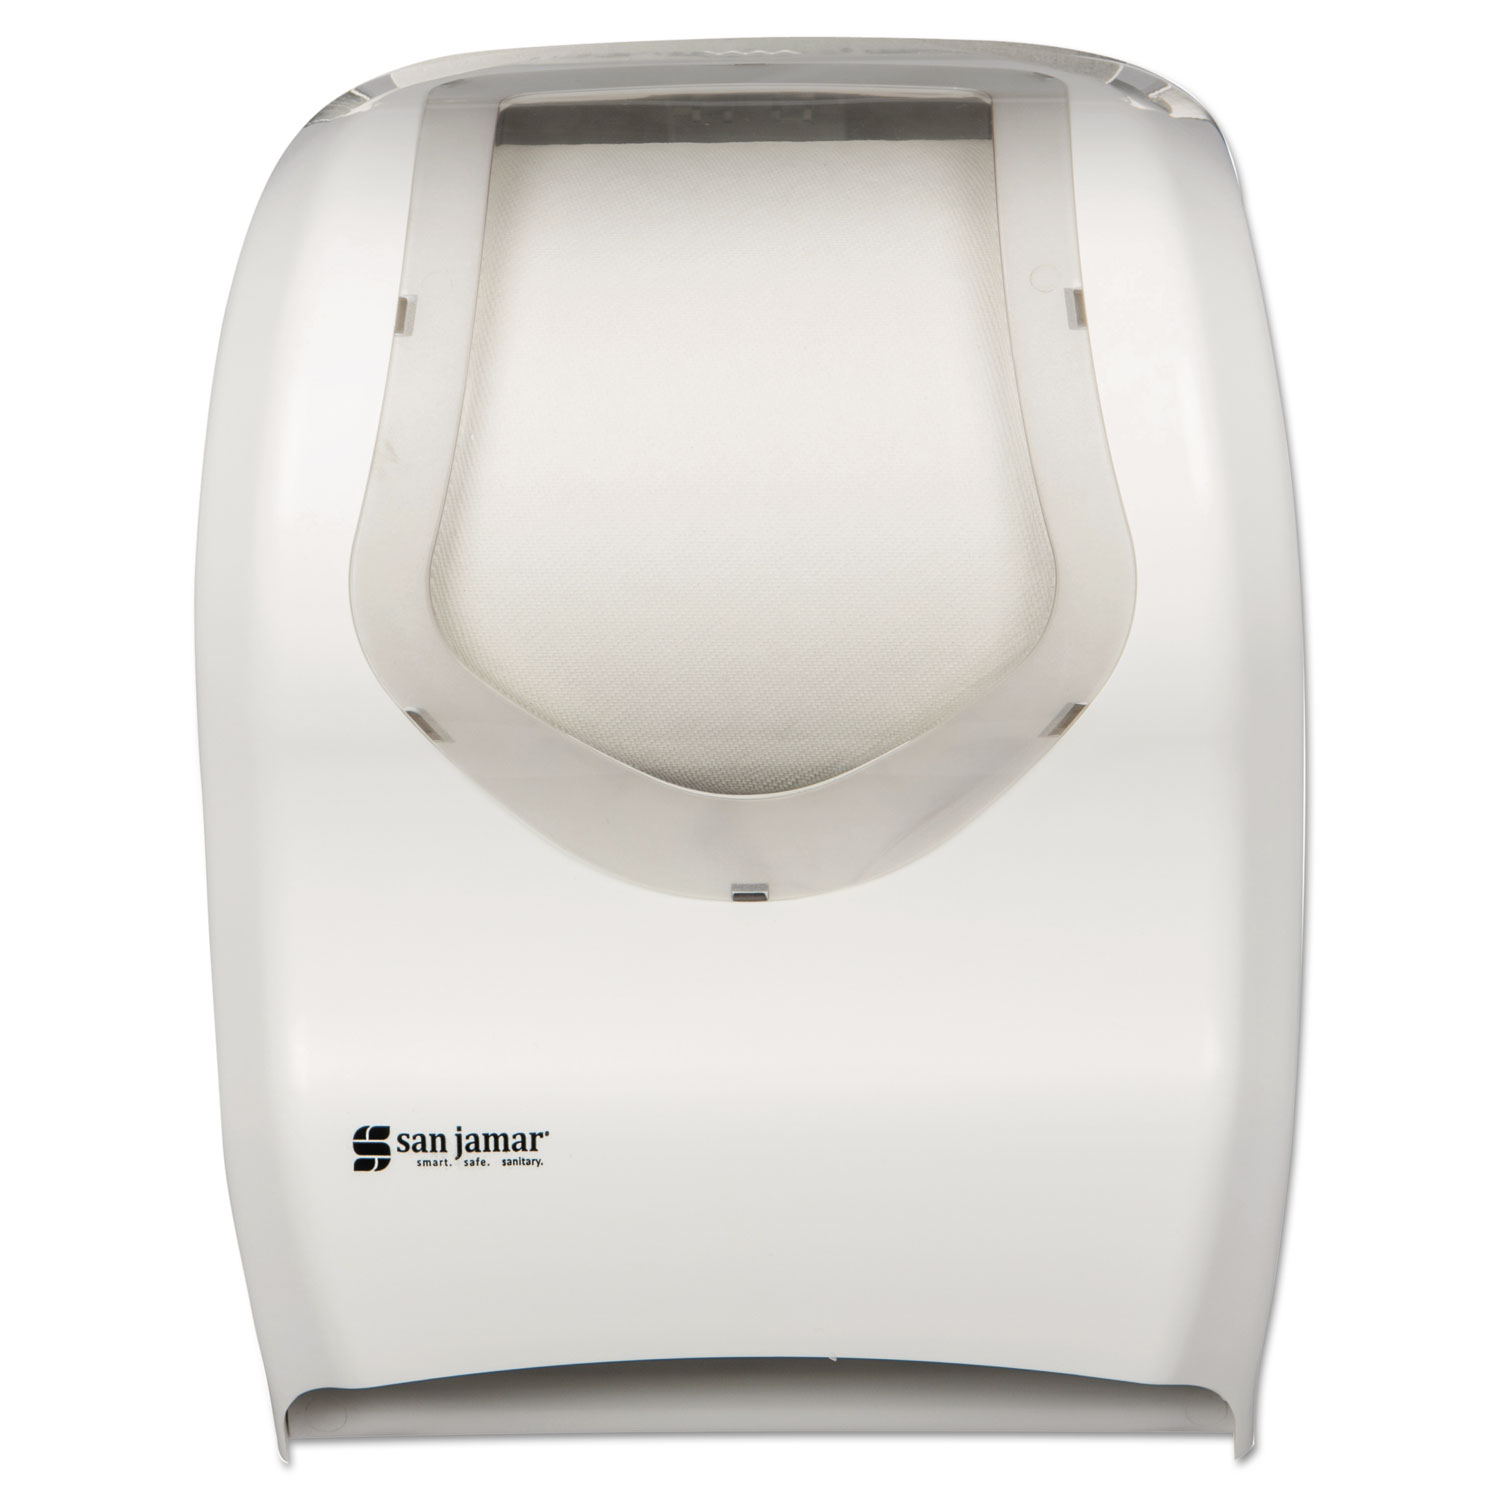 Smart System with iQ Sensor Towel Dispenser, 16 1/2 x 9 3/4 x 12, White/Clear